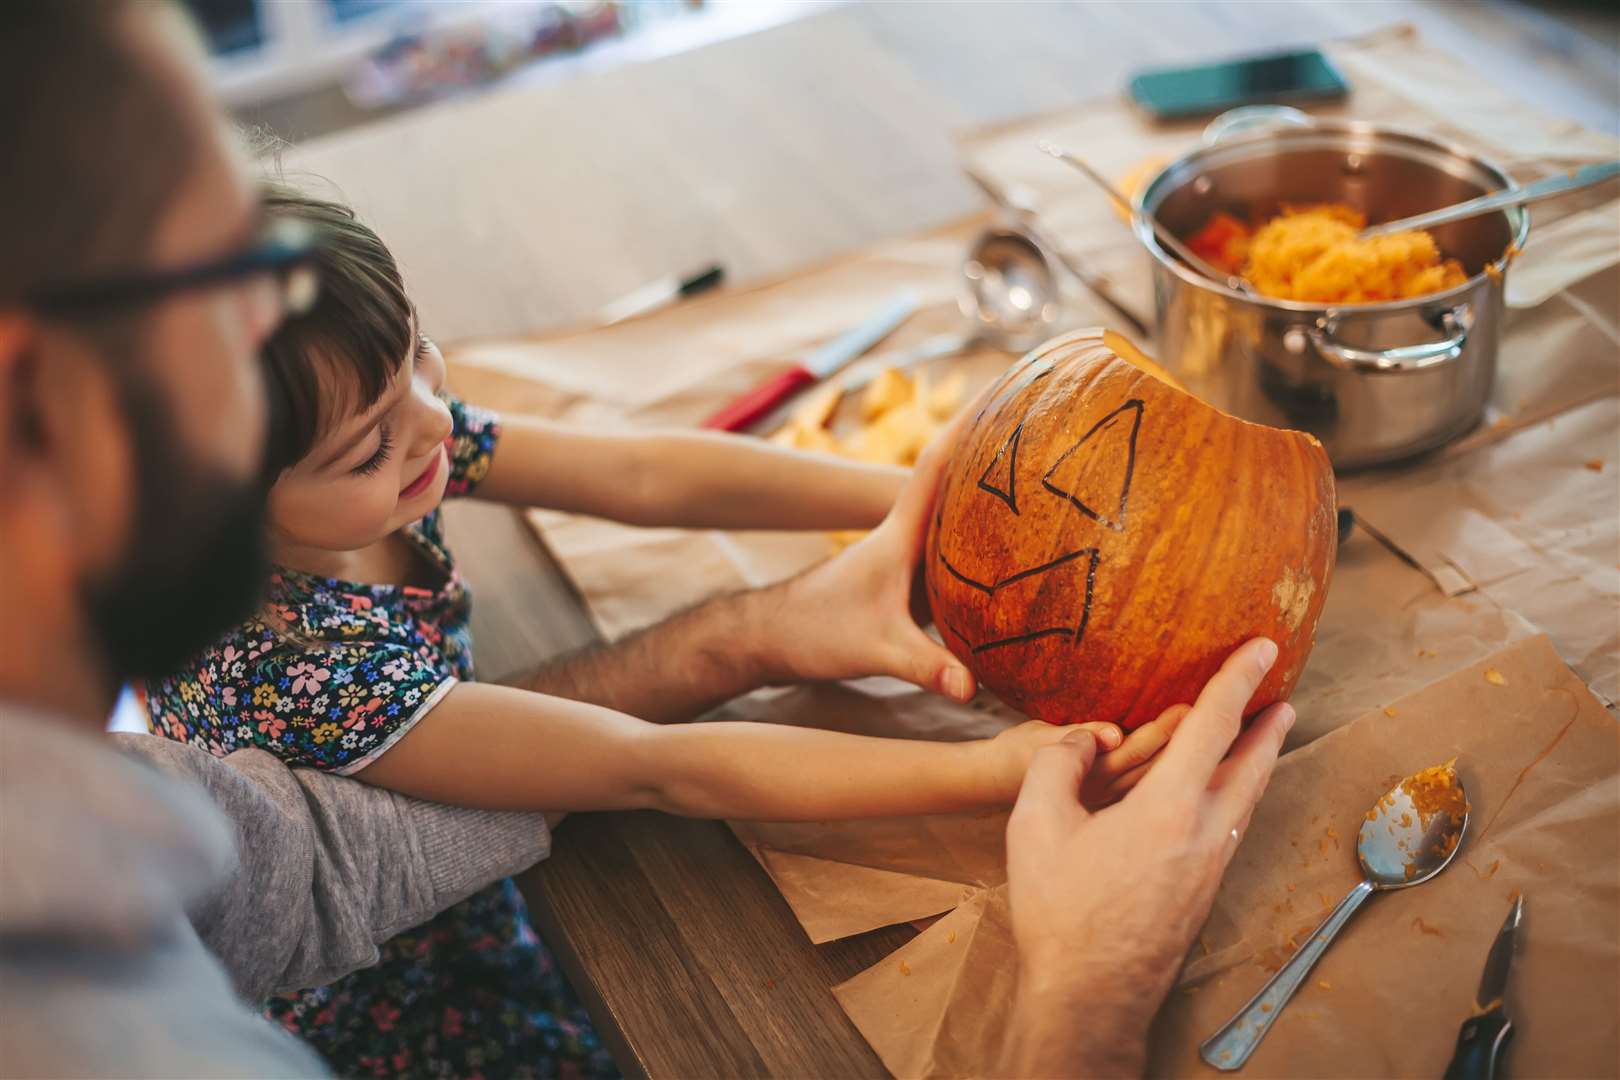 School holidays might be a good opportunity for family activities related to Halloween.